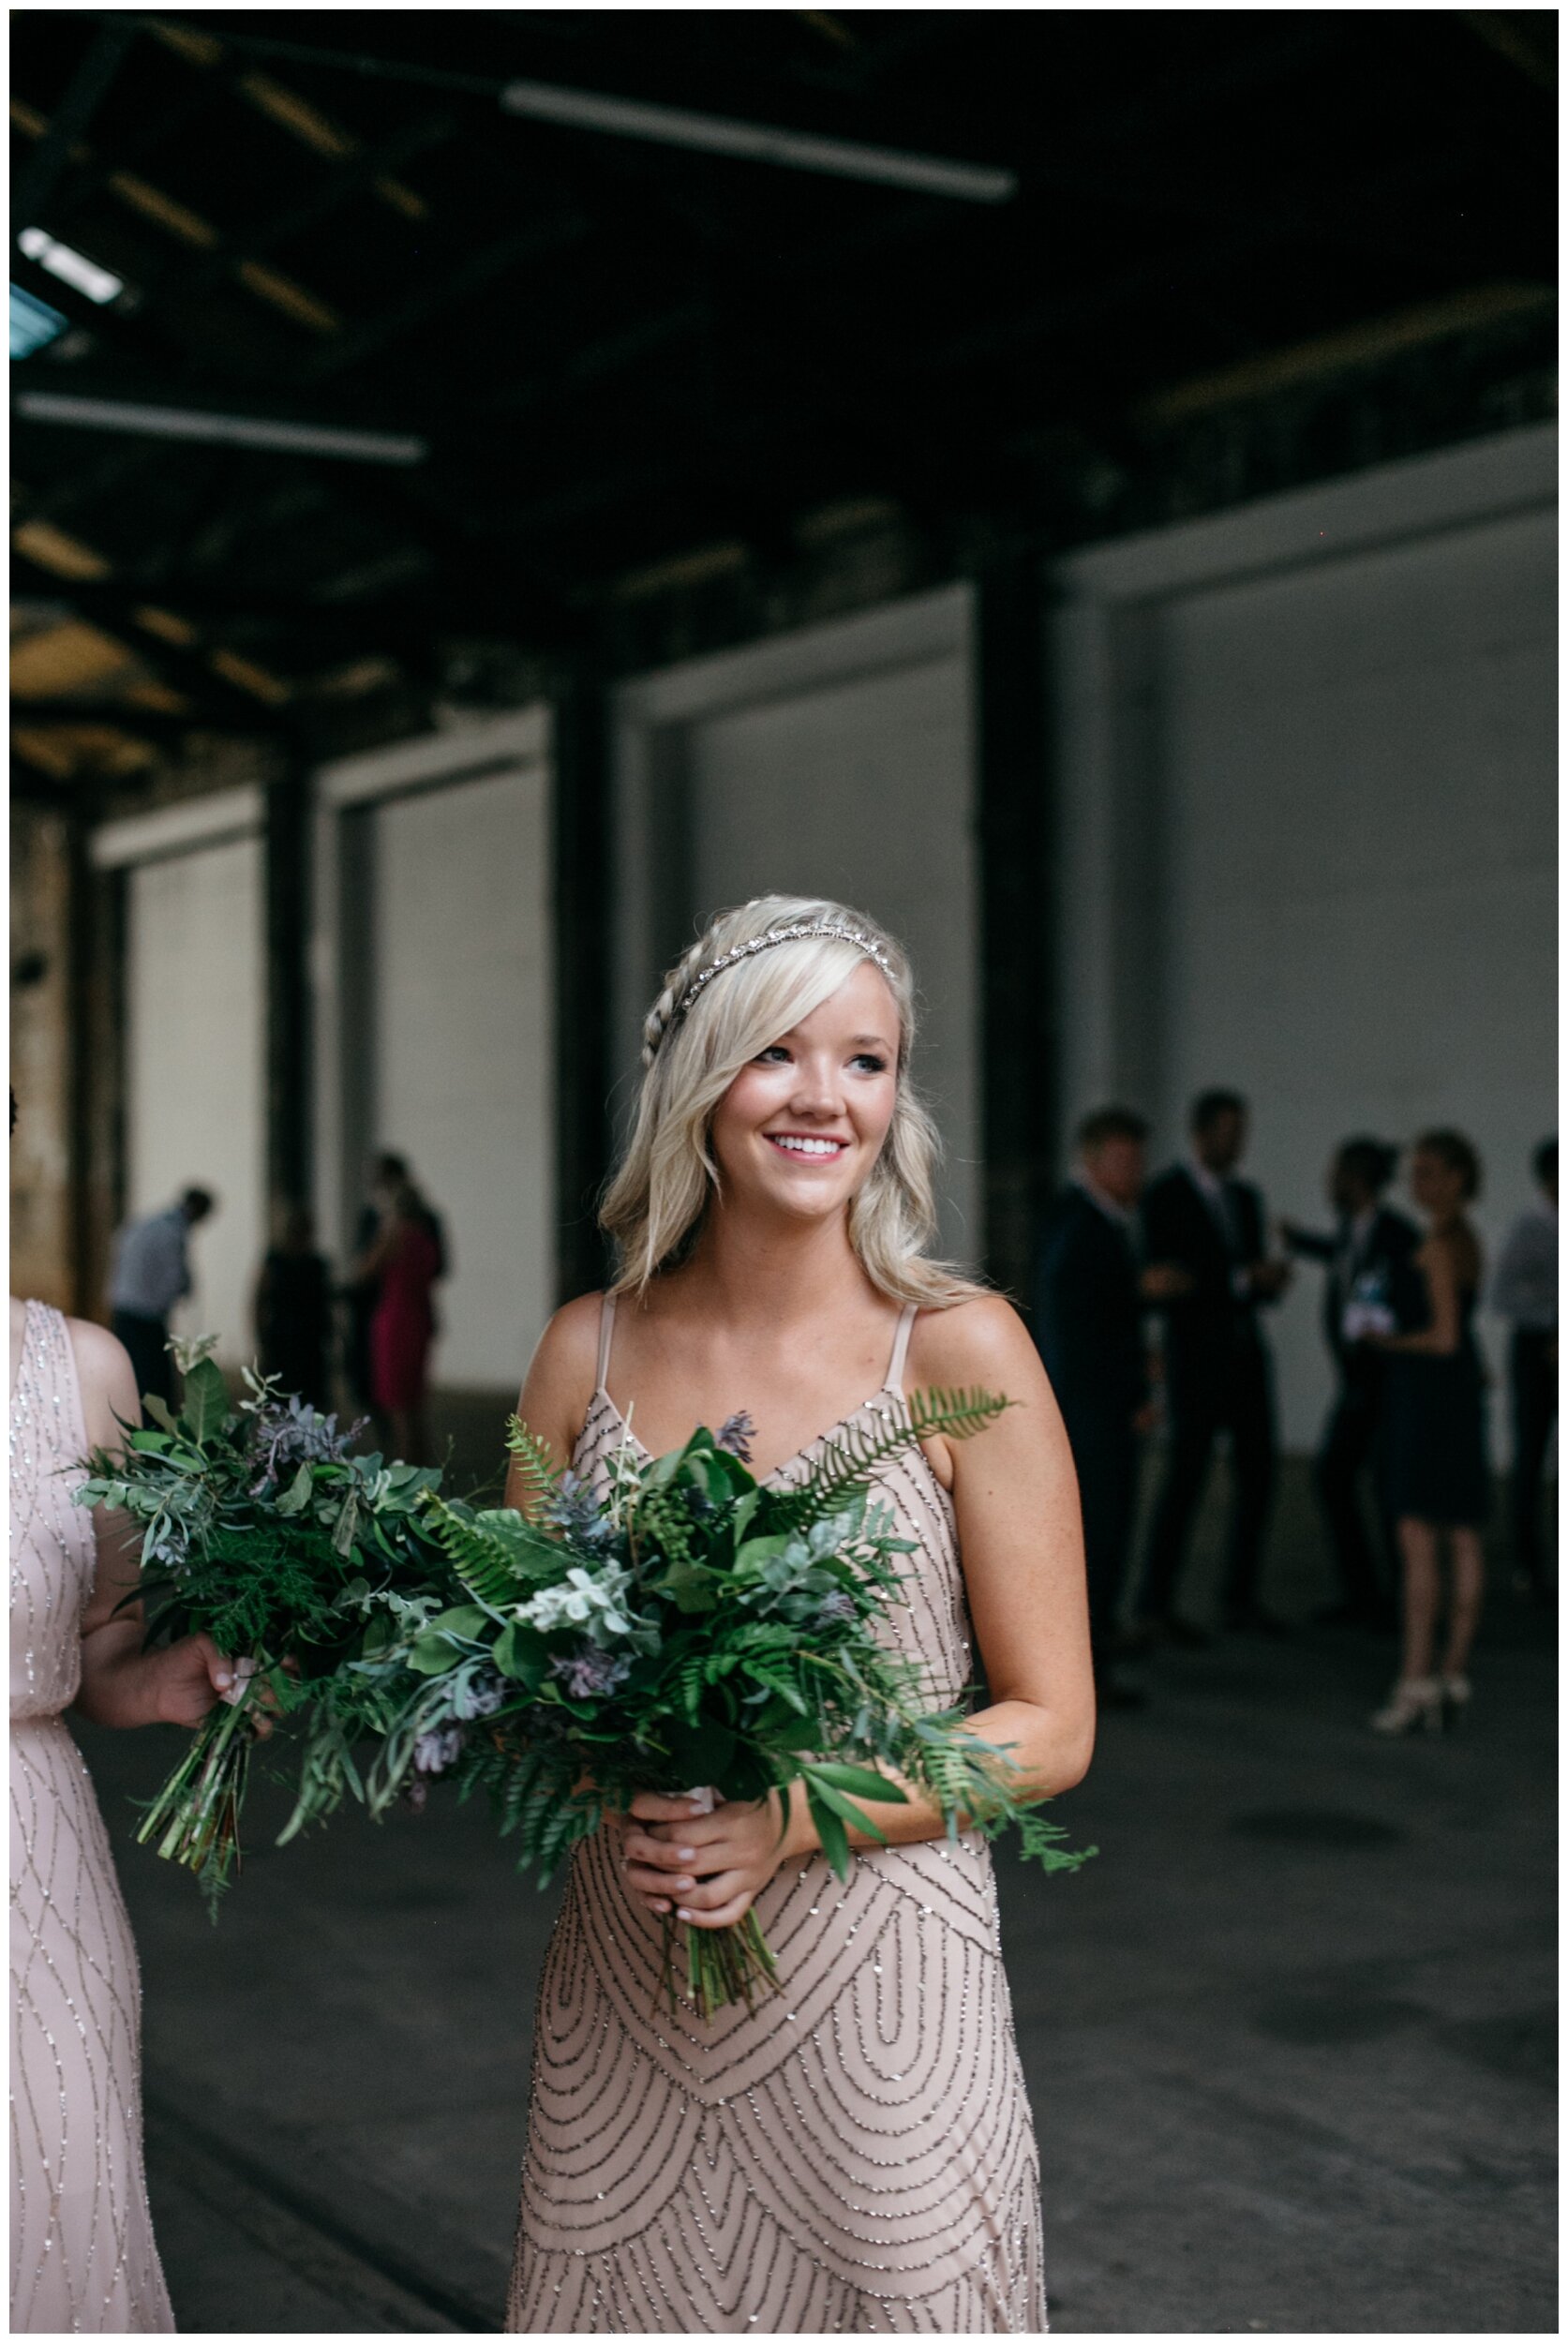 Bridesmaid wearing blush dress with gold sequins holding fern bouquet